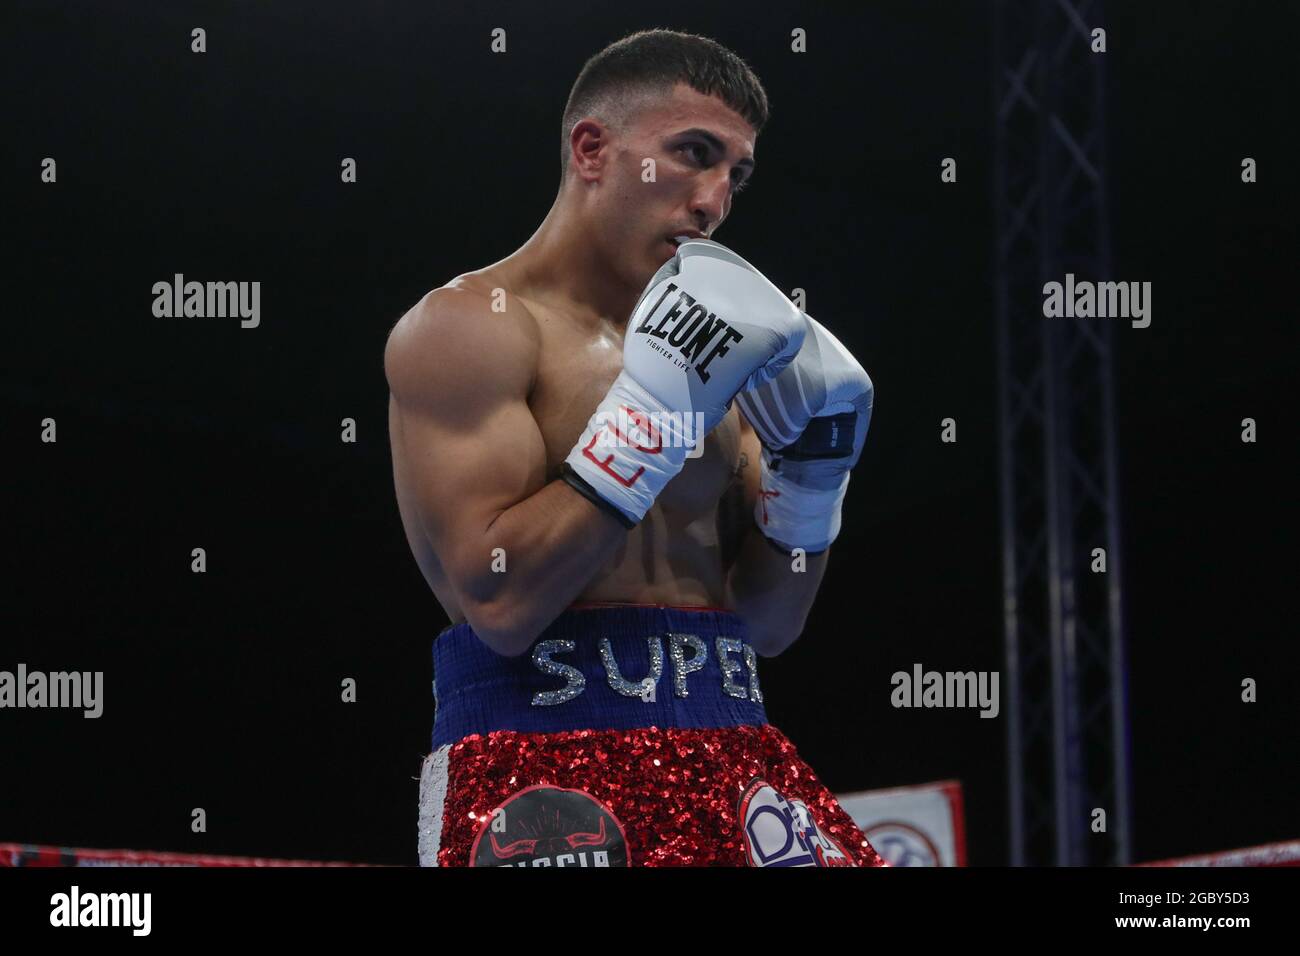 BRESCIA, ITALY - MAY 15: Mario Alfano during their fight for the EU super featherweight title at the Mario Rigamonti Sport Center on May 15, 2021 in Brescia, Italy.  Credit: Stefano Nicoli/Speed Media/Alamy Live News Stock Photo